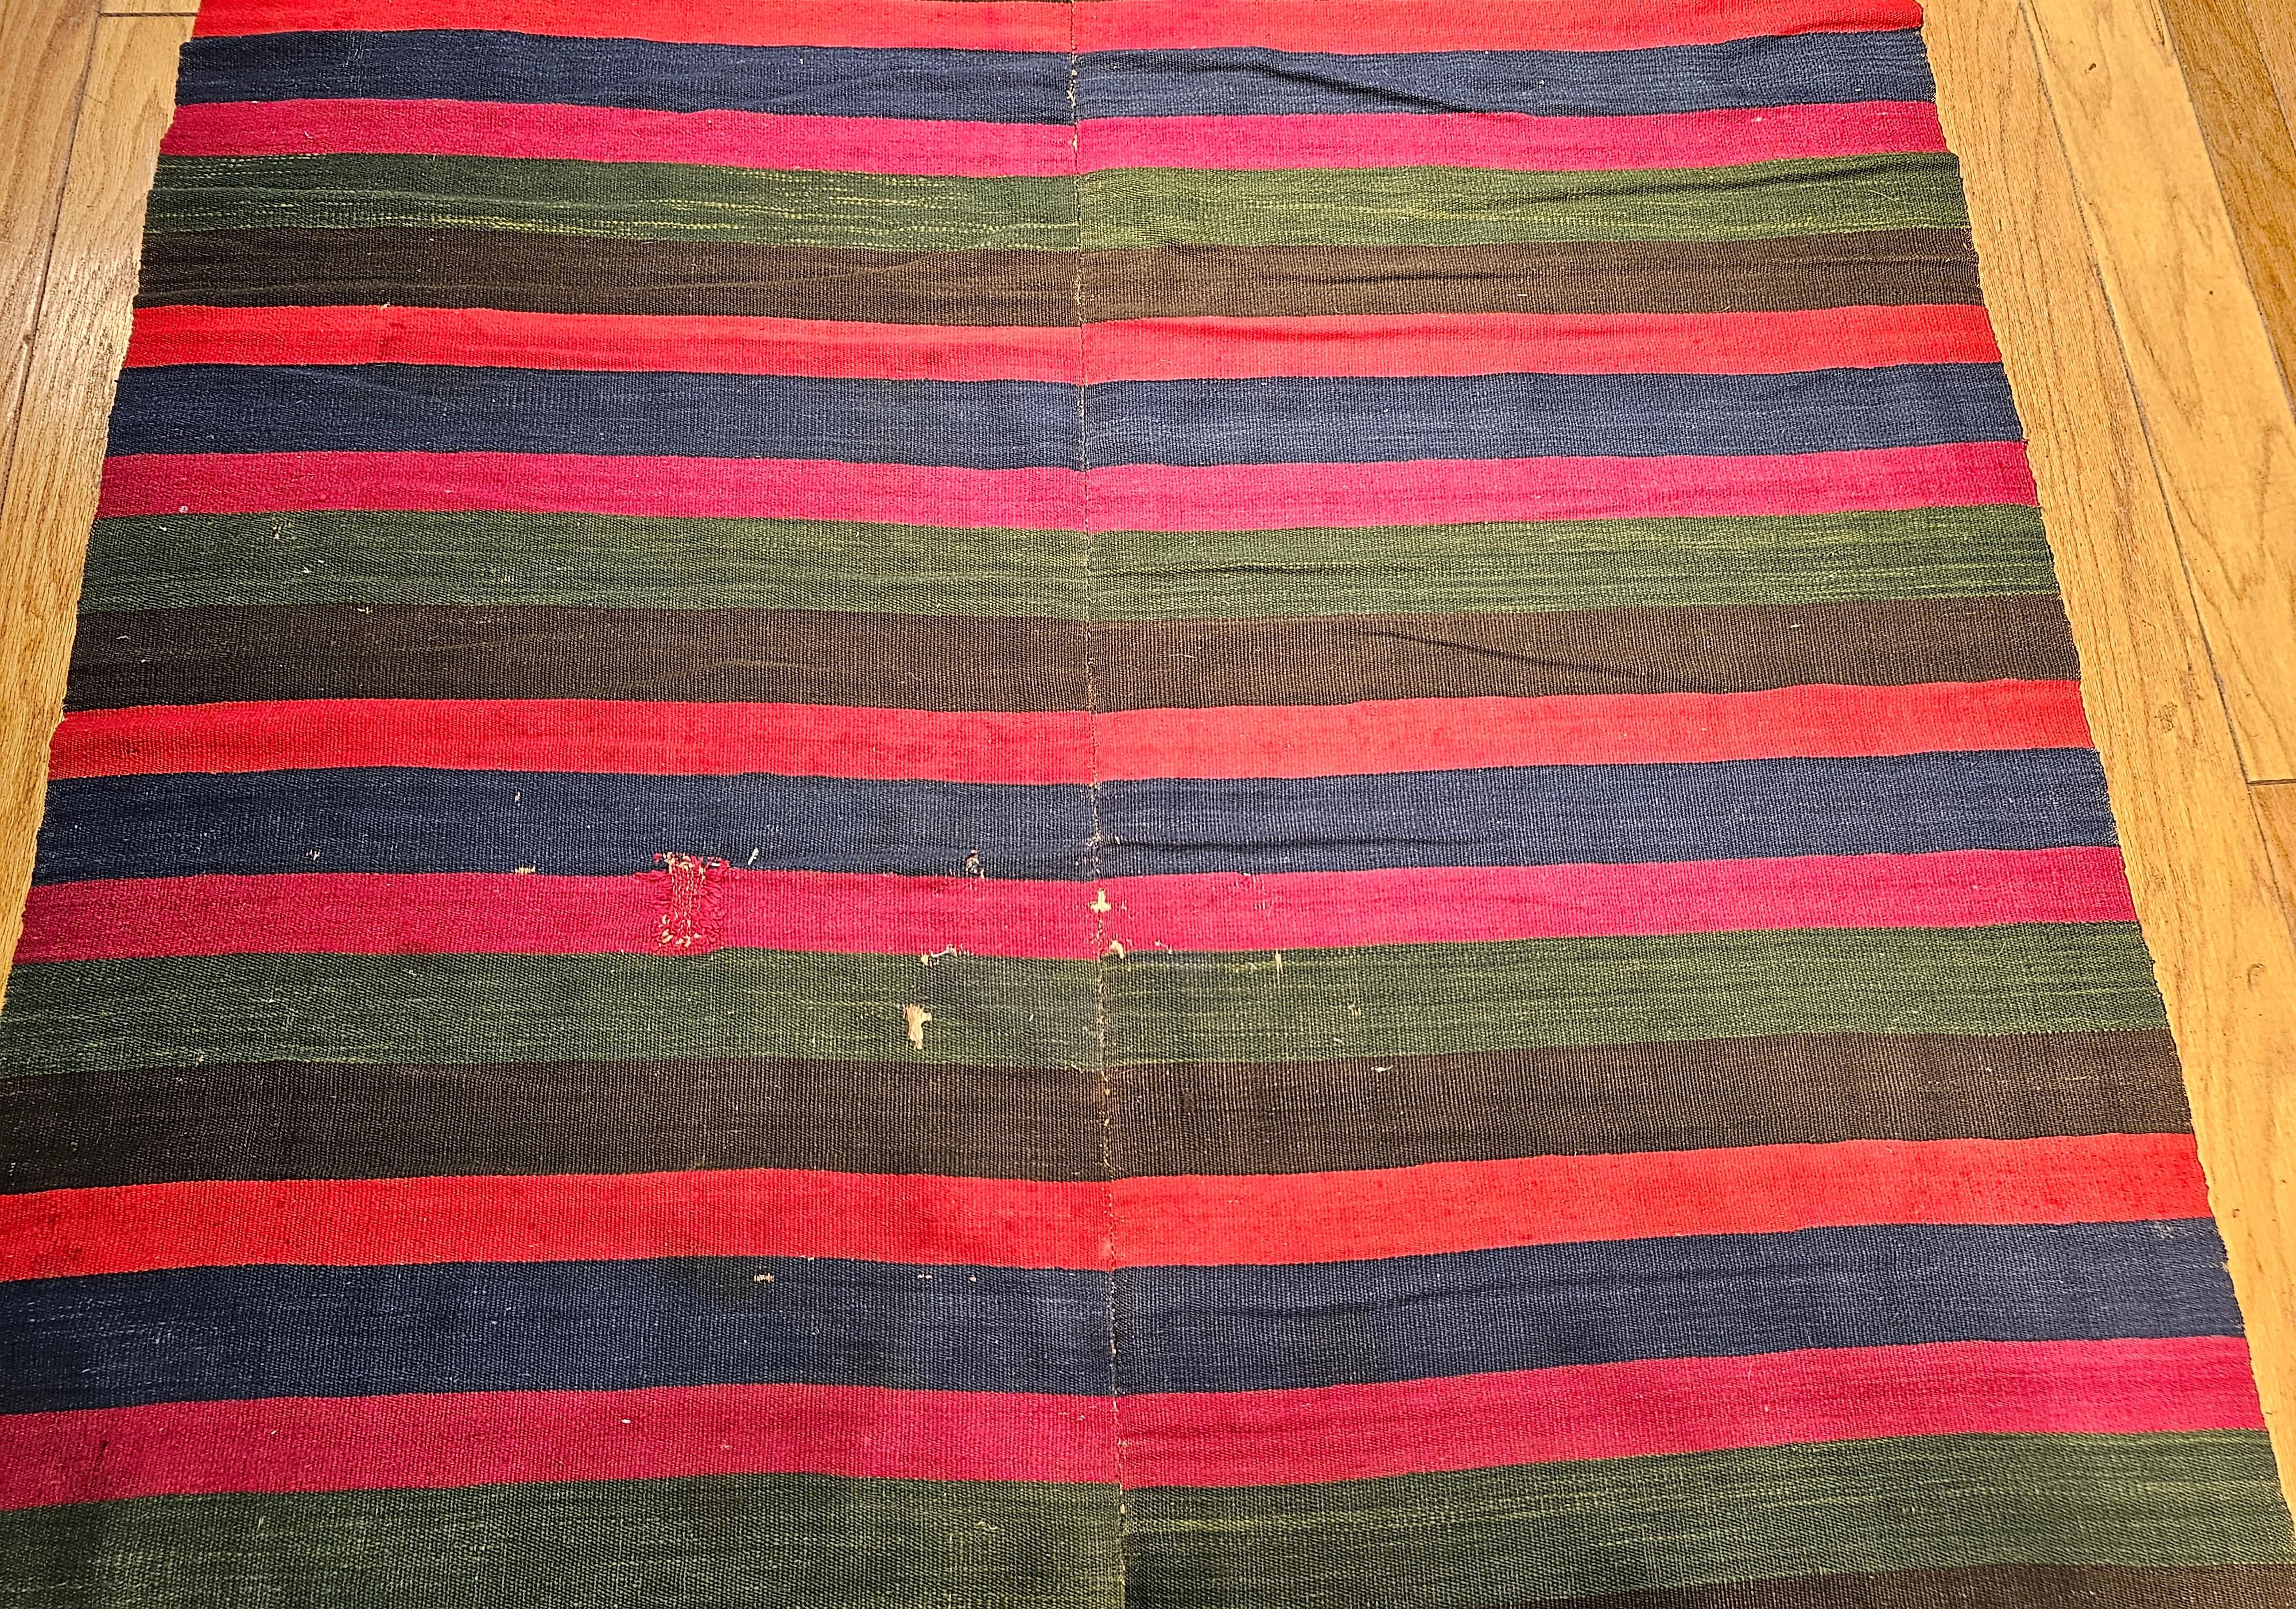 Vintage South American Hand-woven Kilim in Stripe Pattern in Magenta, Blue, Red In Good Condition For Sale In Barrington, IL